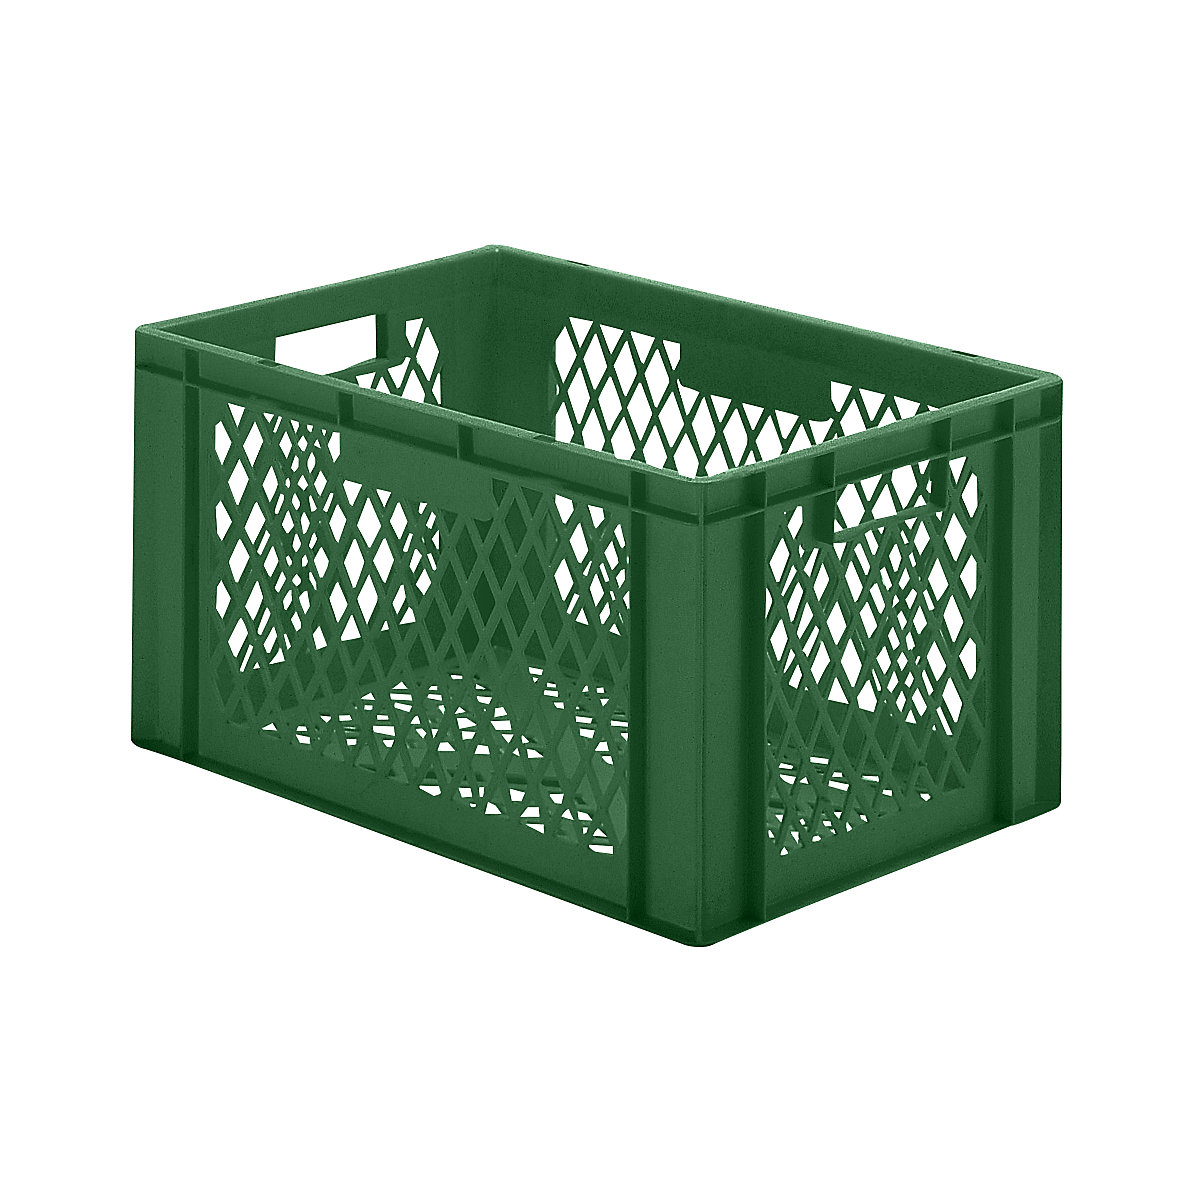 Euro stacking container, perforated walls and base, LxWxH 600 x 400 x 320 mm, green, pack of 5